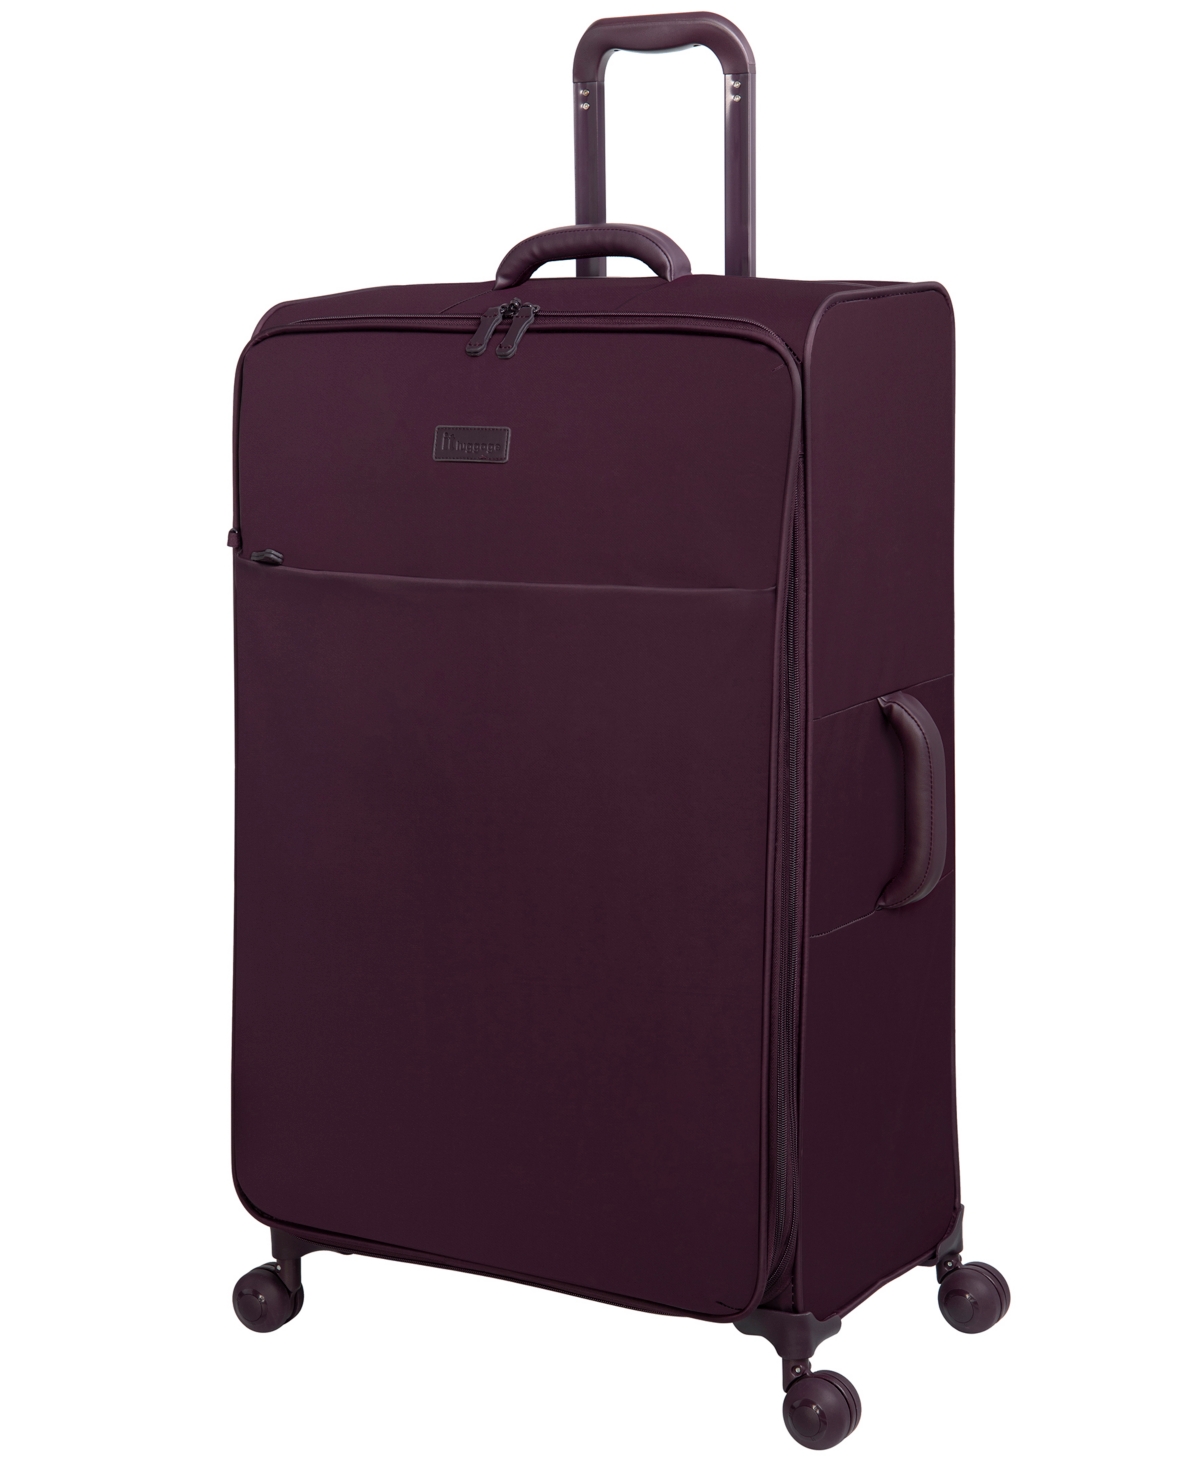 It Luggage Lustrous 20" Softside Carry-on 8-wheel Spinner In Aubergine